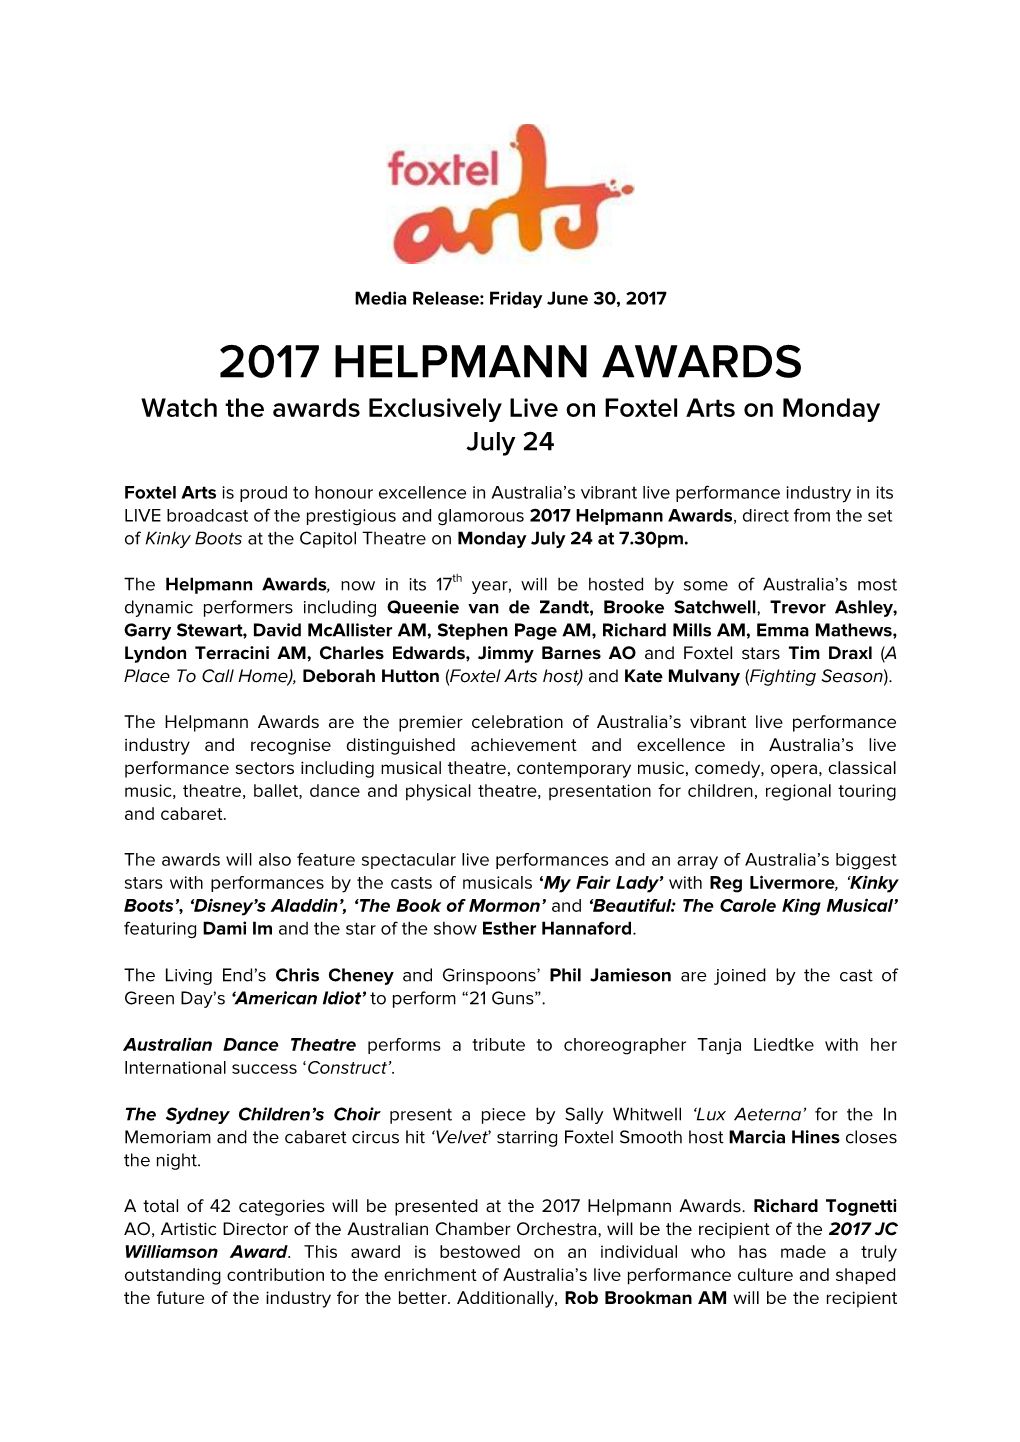 2017 HELPMANN AWARDS Watch the Awards Exclusively Live on Foxtel Arts on Monday July 24